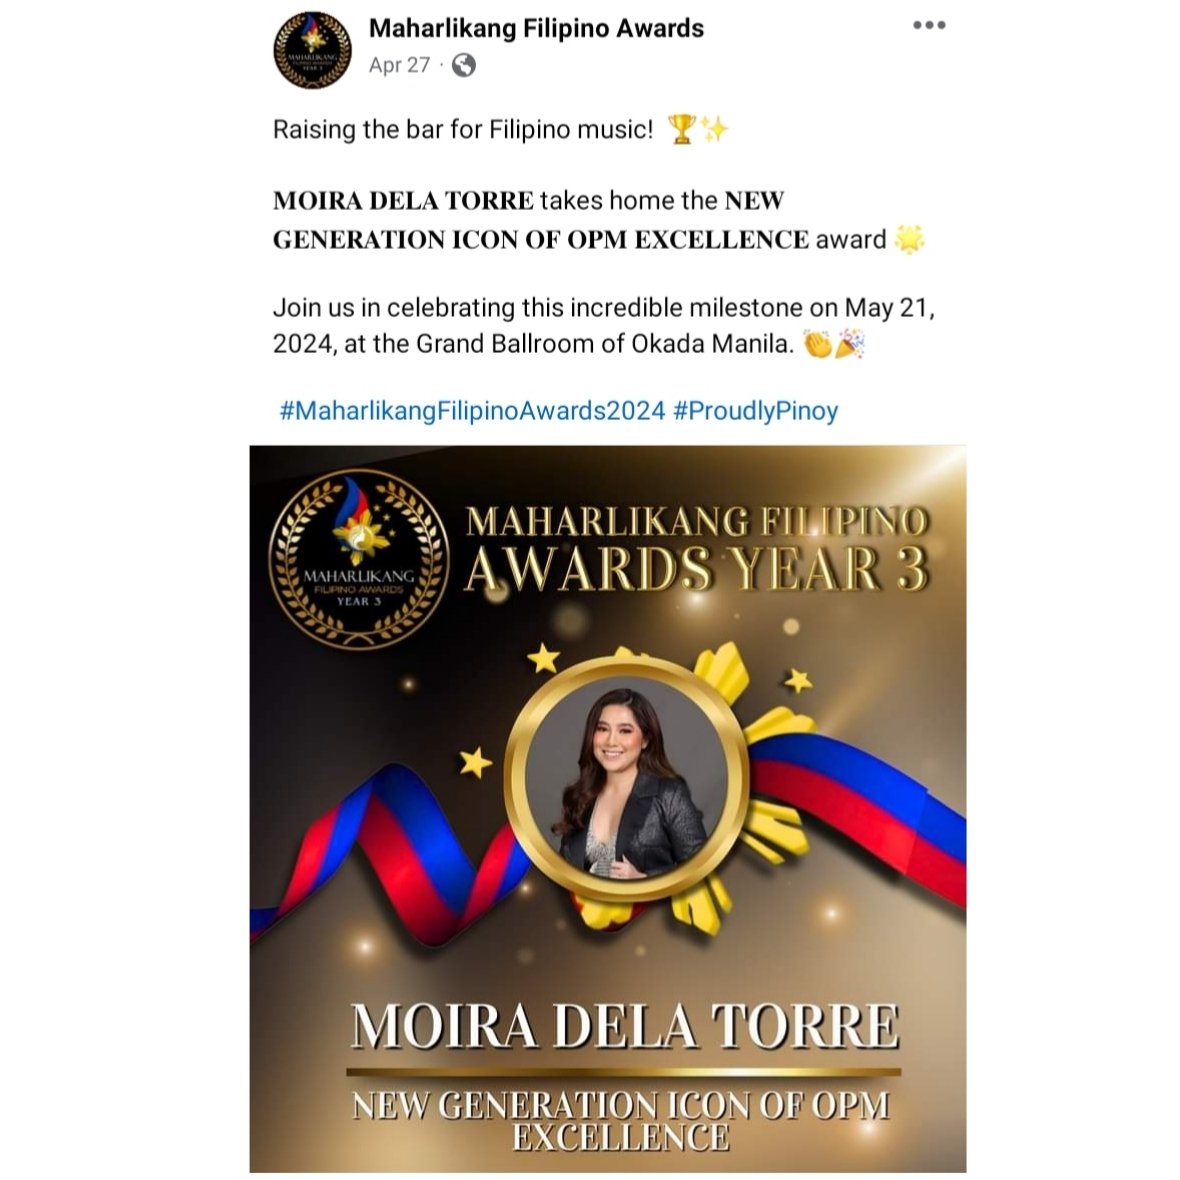 ✨Good karma✨

Moira Dela Torre is set to receive the NEW GENERATION ICON OF OPM EXCELLENCE AWARD on Maharlikang Filipino Awards 2024 to be held in Okada, Manila this May 21st. 

Congratulations, Moira! 👏🏼 🏆💐

@moiradelatorre | #MoiraDelaTorre